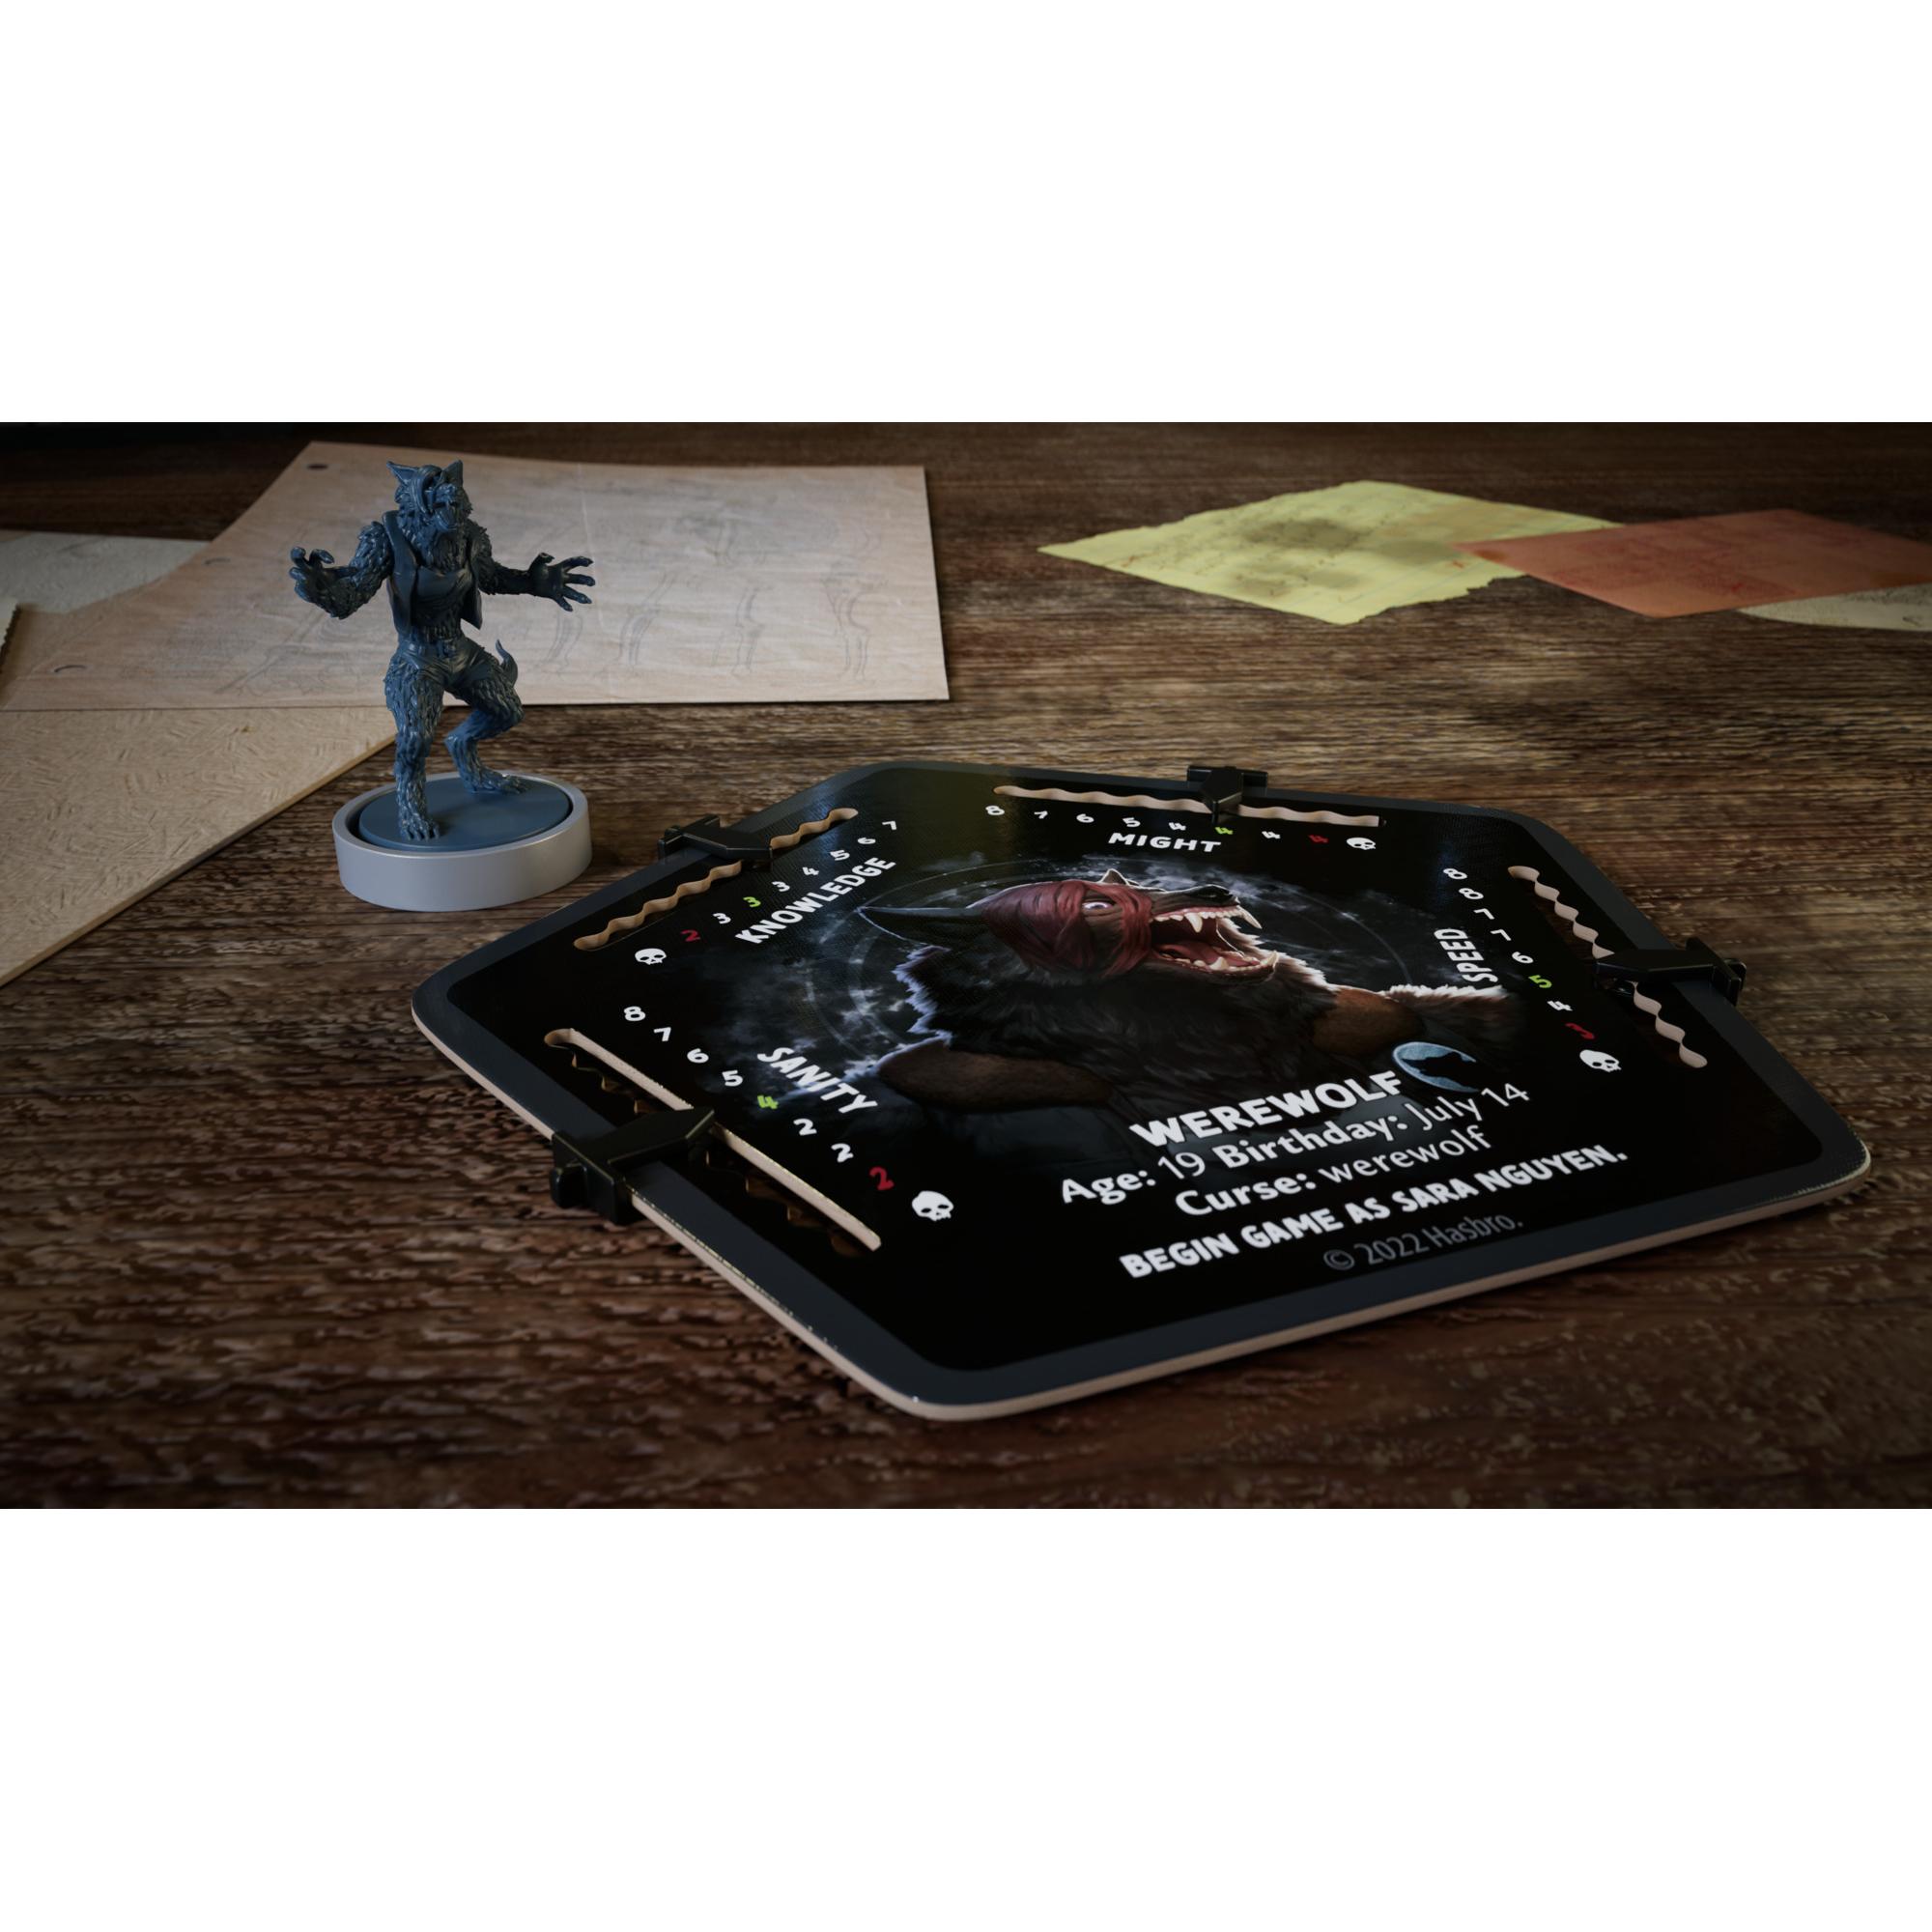 Betrayal the Werewolf's Journey Blood on the Moon Expansion Pack, Requires Betrayal at HOTH 3rd Edition to Play (Sold Separately)